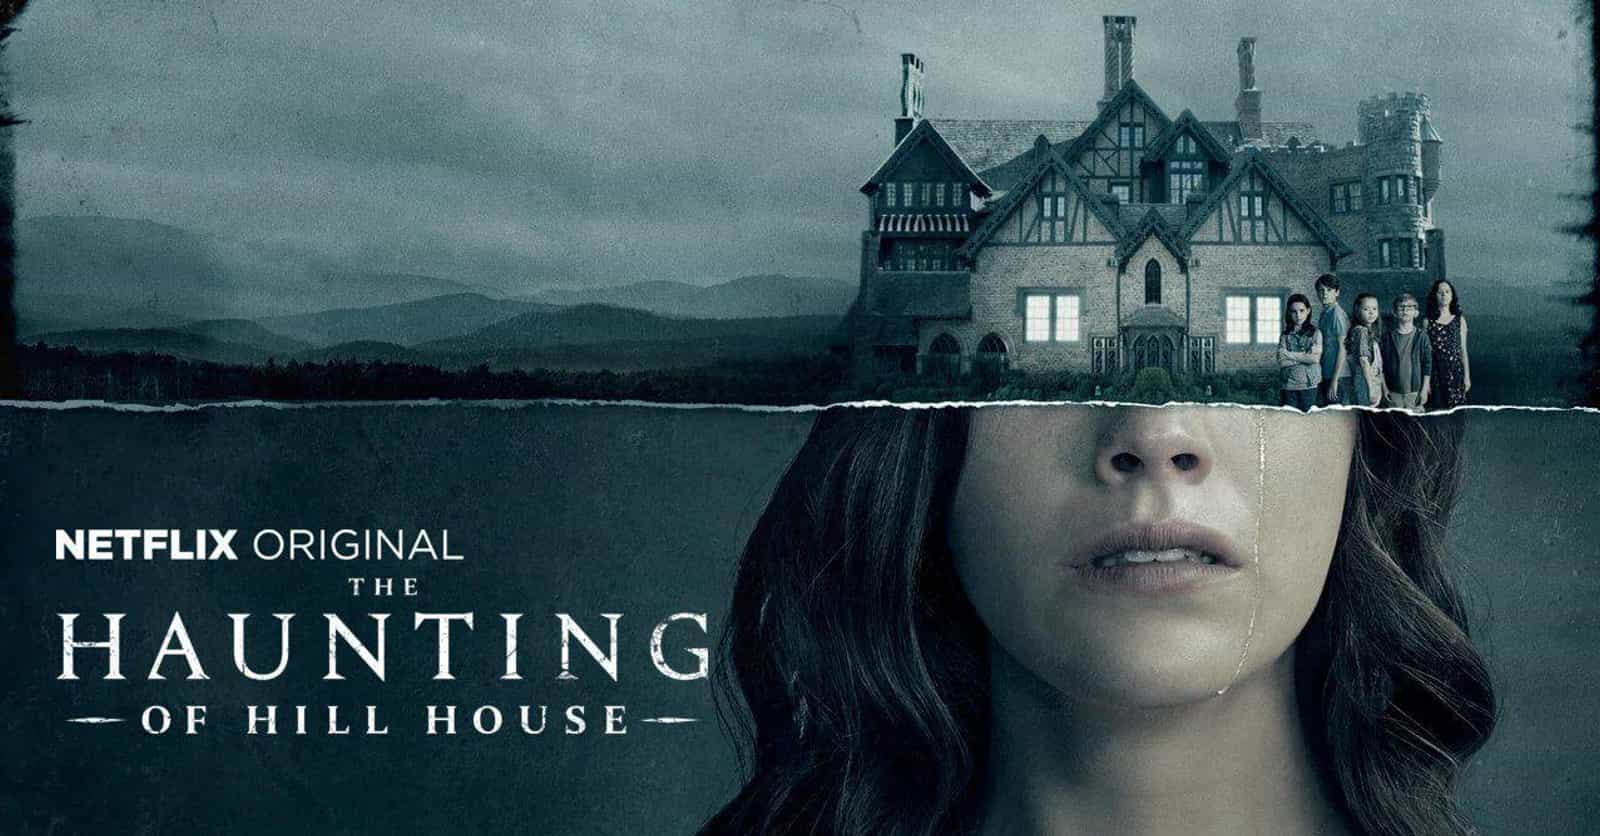 The Most Obscure Ghosts Hidden In The Background Of 'The Haunting Of Hill House'